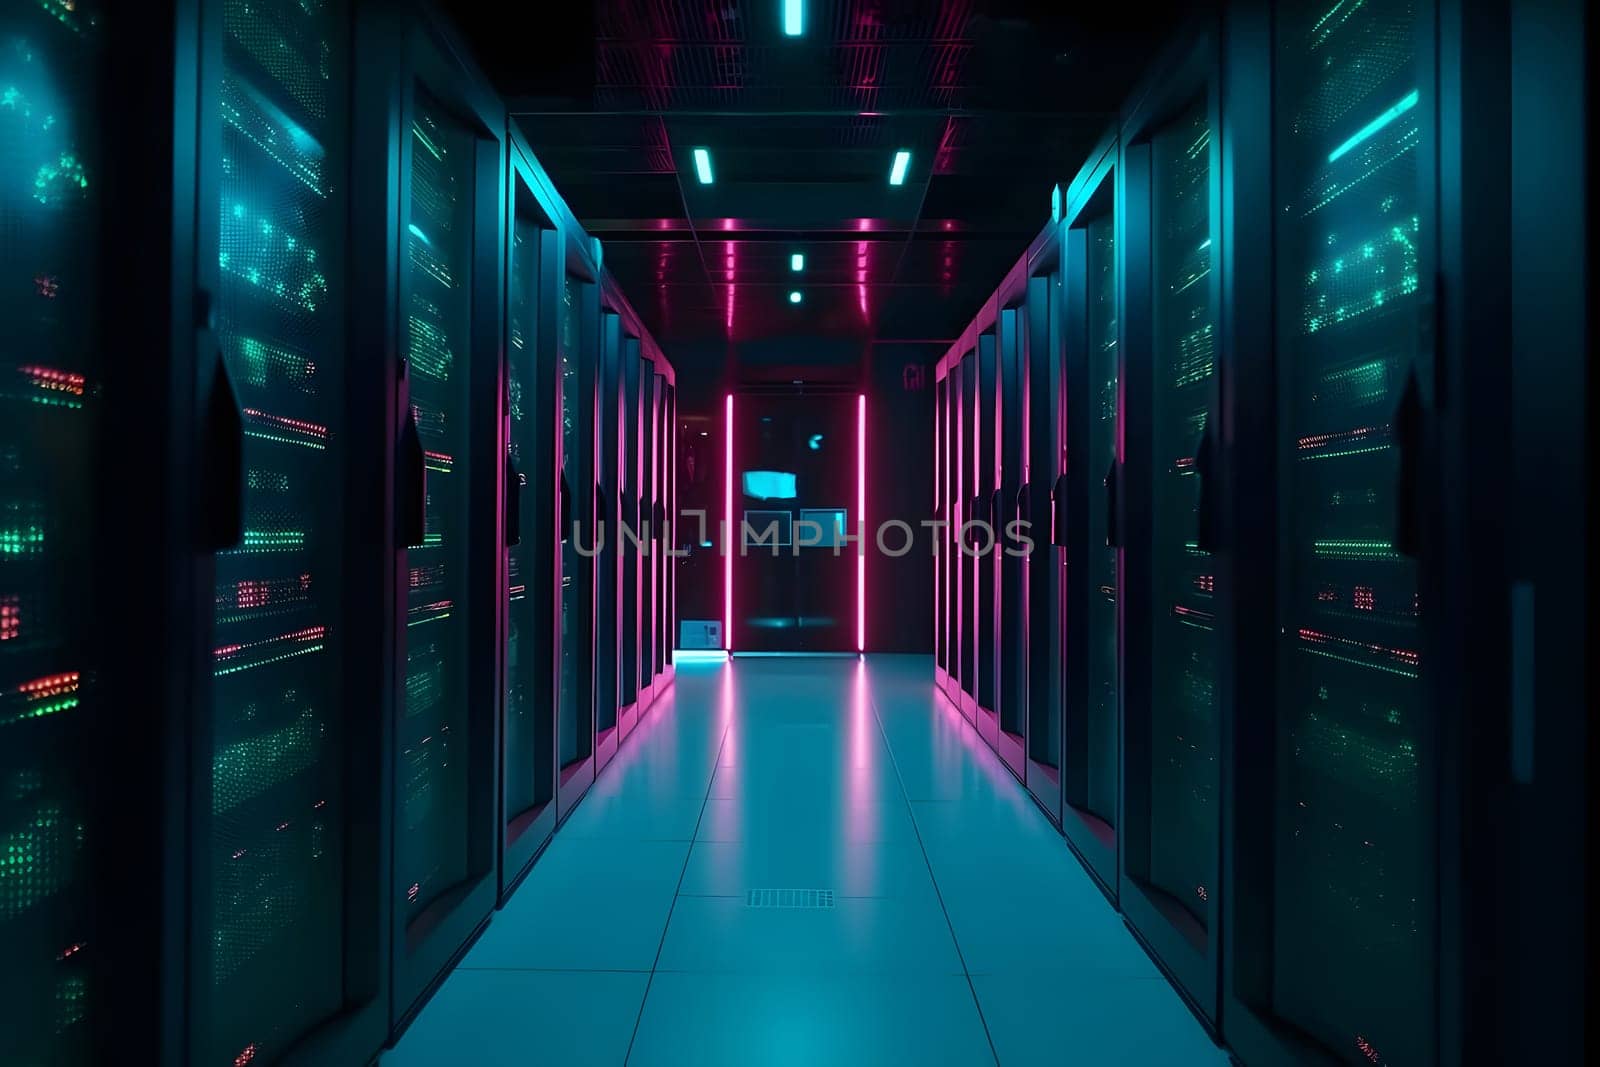 data center with multiple rows of fully operational servers in cyan-purple colors, neural network generated image by z1b